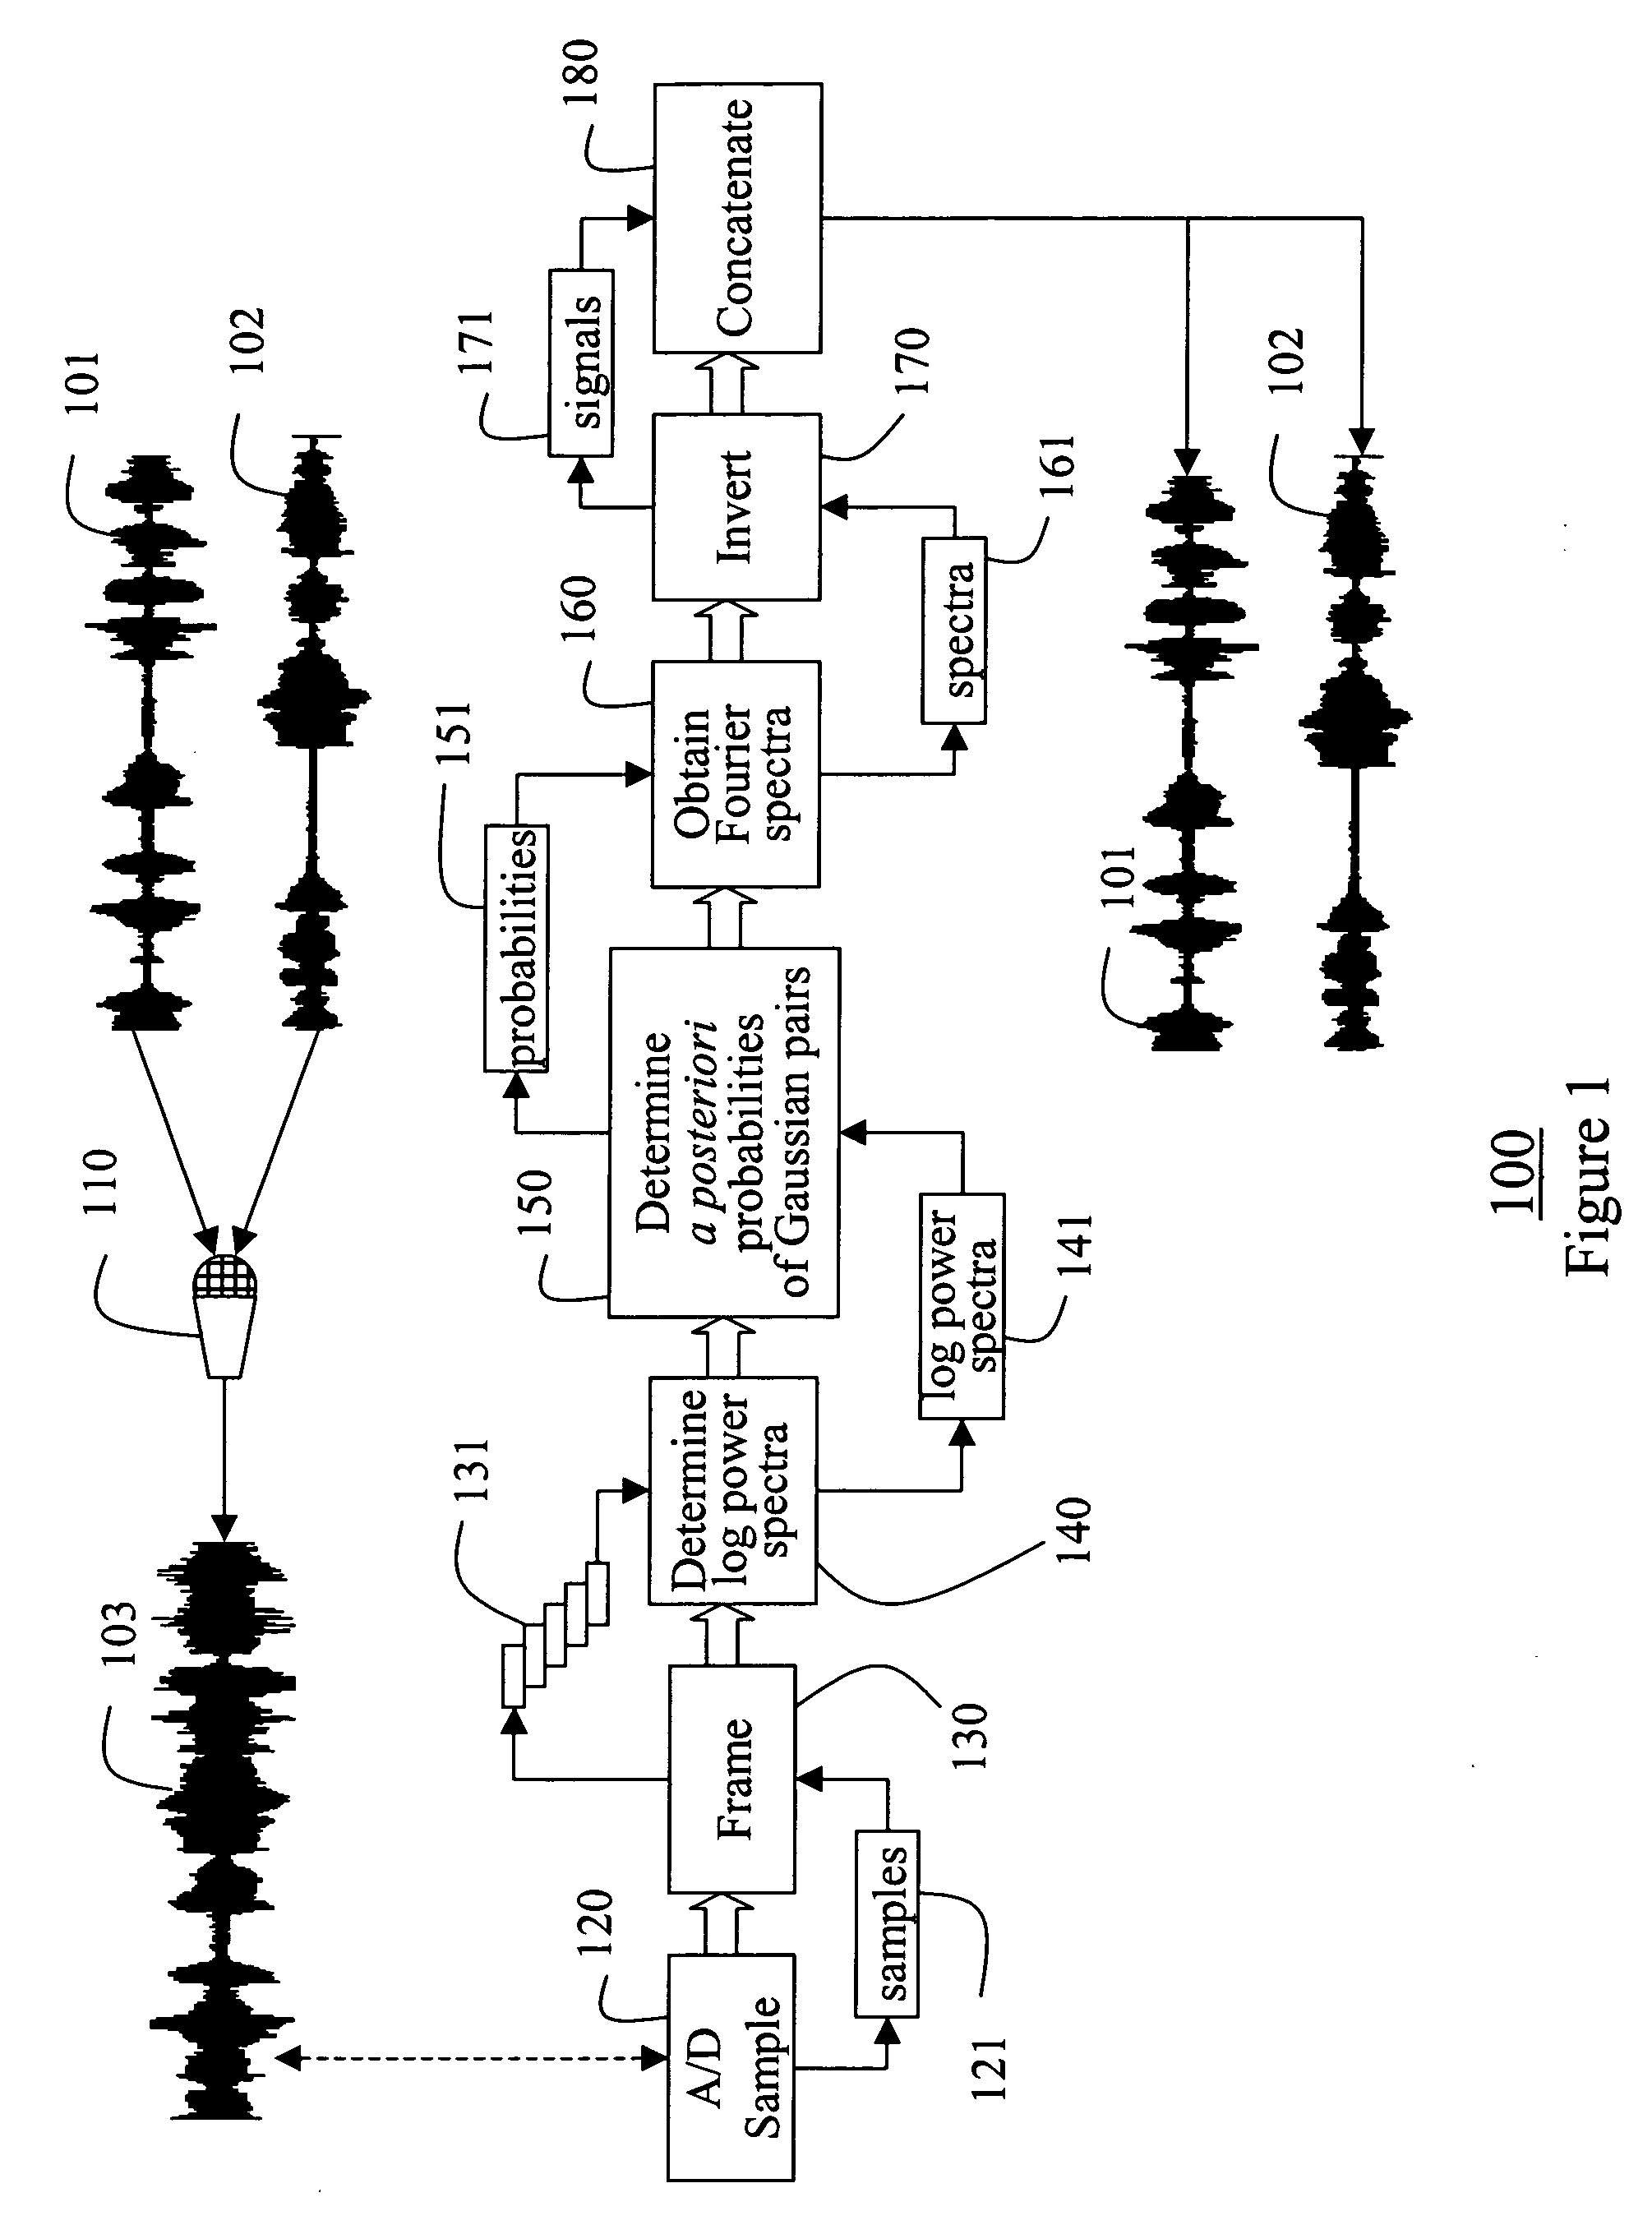 Separating multiple audio signals recorded as a single mixed signal